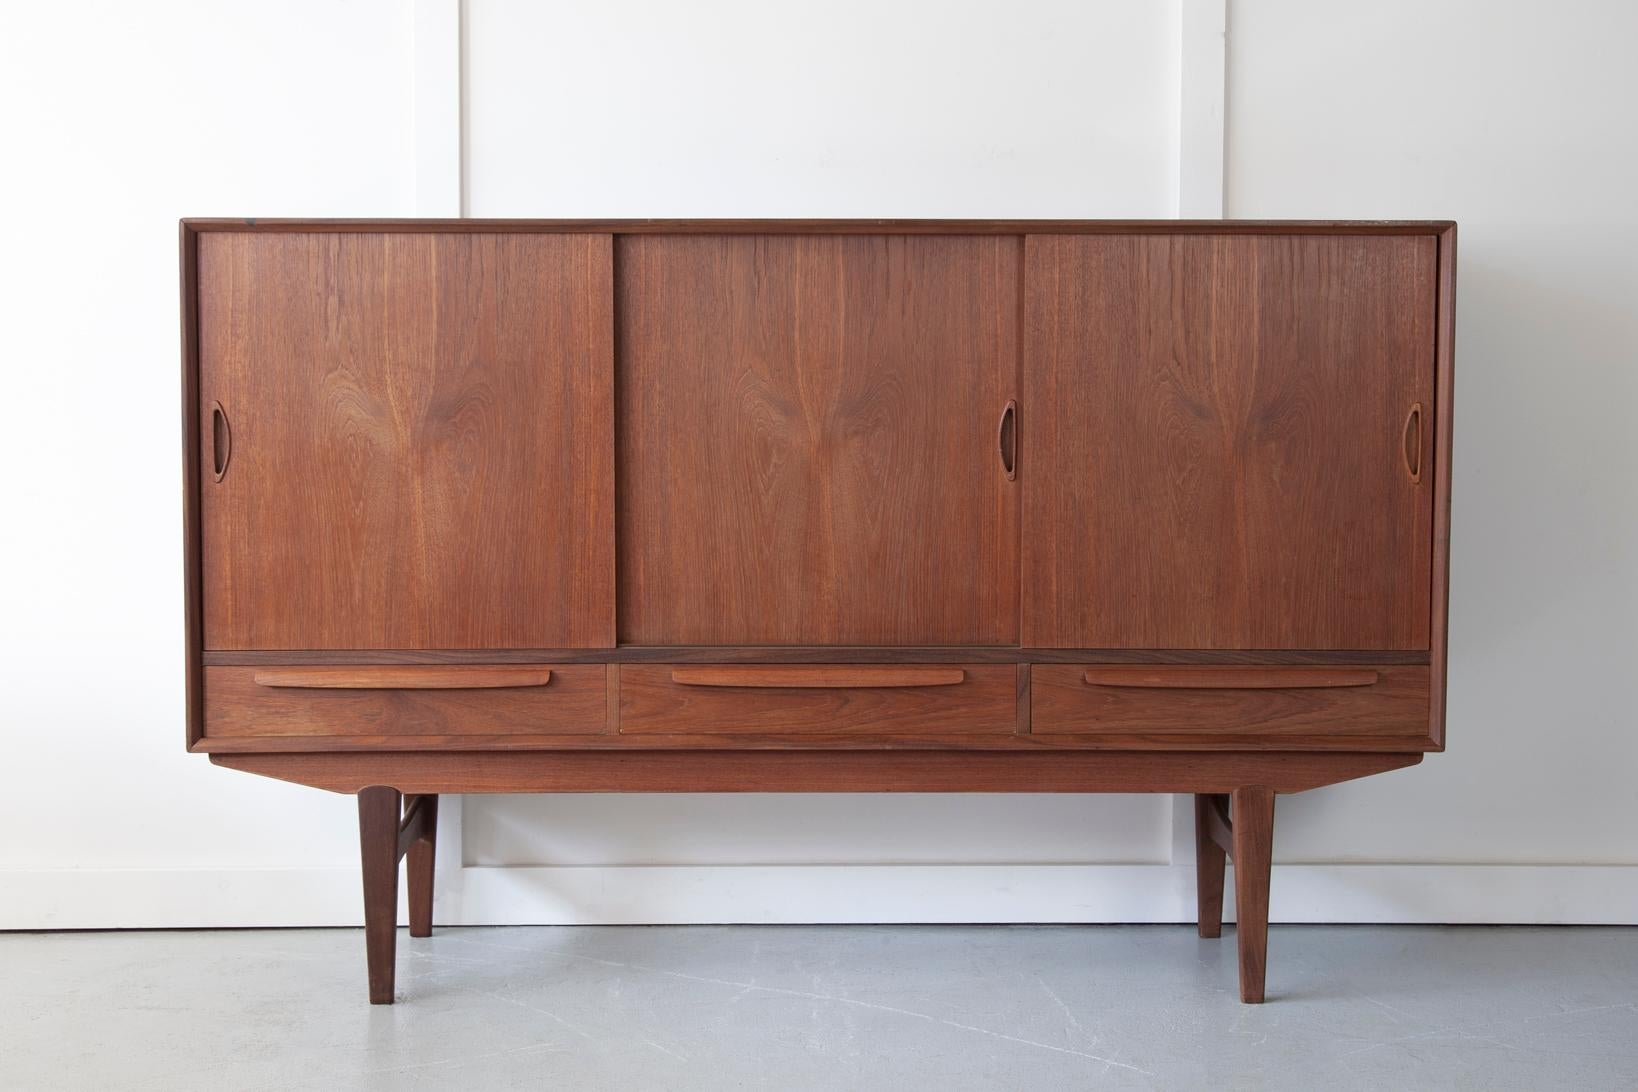 A large teak highboard from Denmark, with three drawers which feature elegant lipped handles and sliding doors with curved inset handles to reveal expansive storage compartments. The middle compartment houses a set of three shallow drawers and a